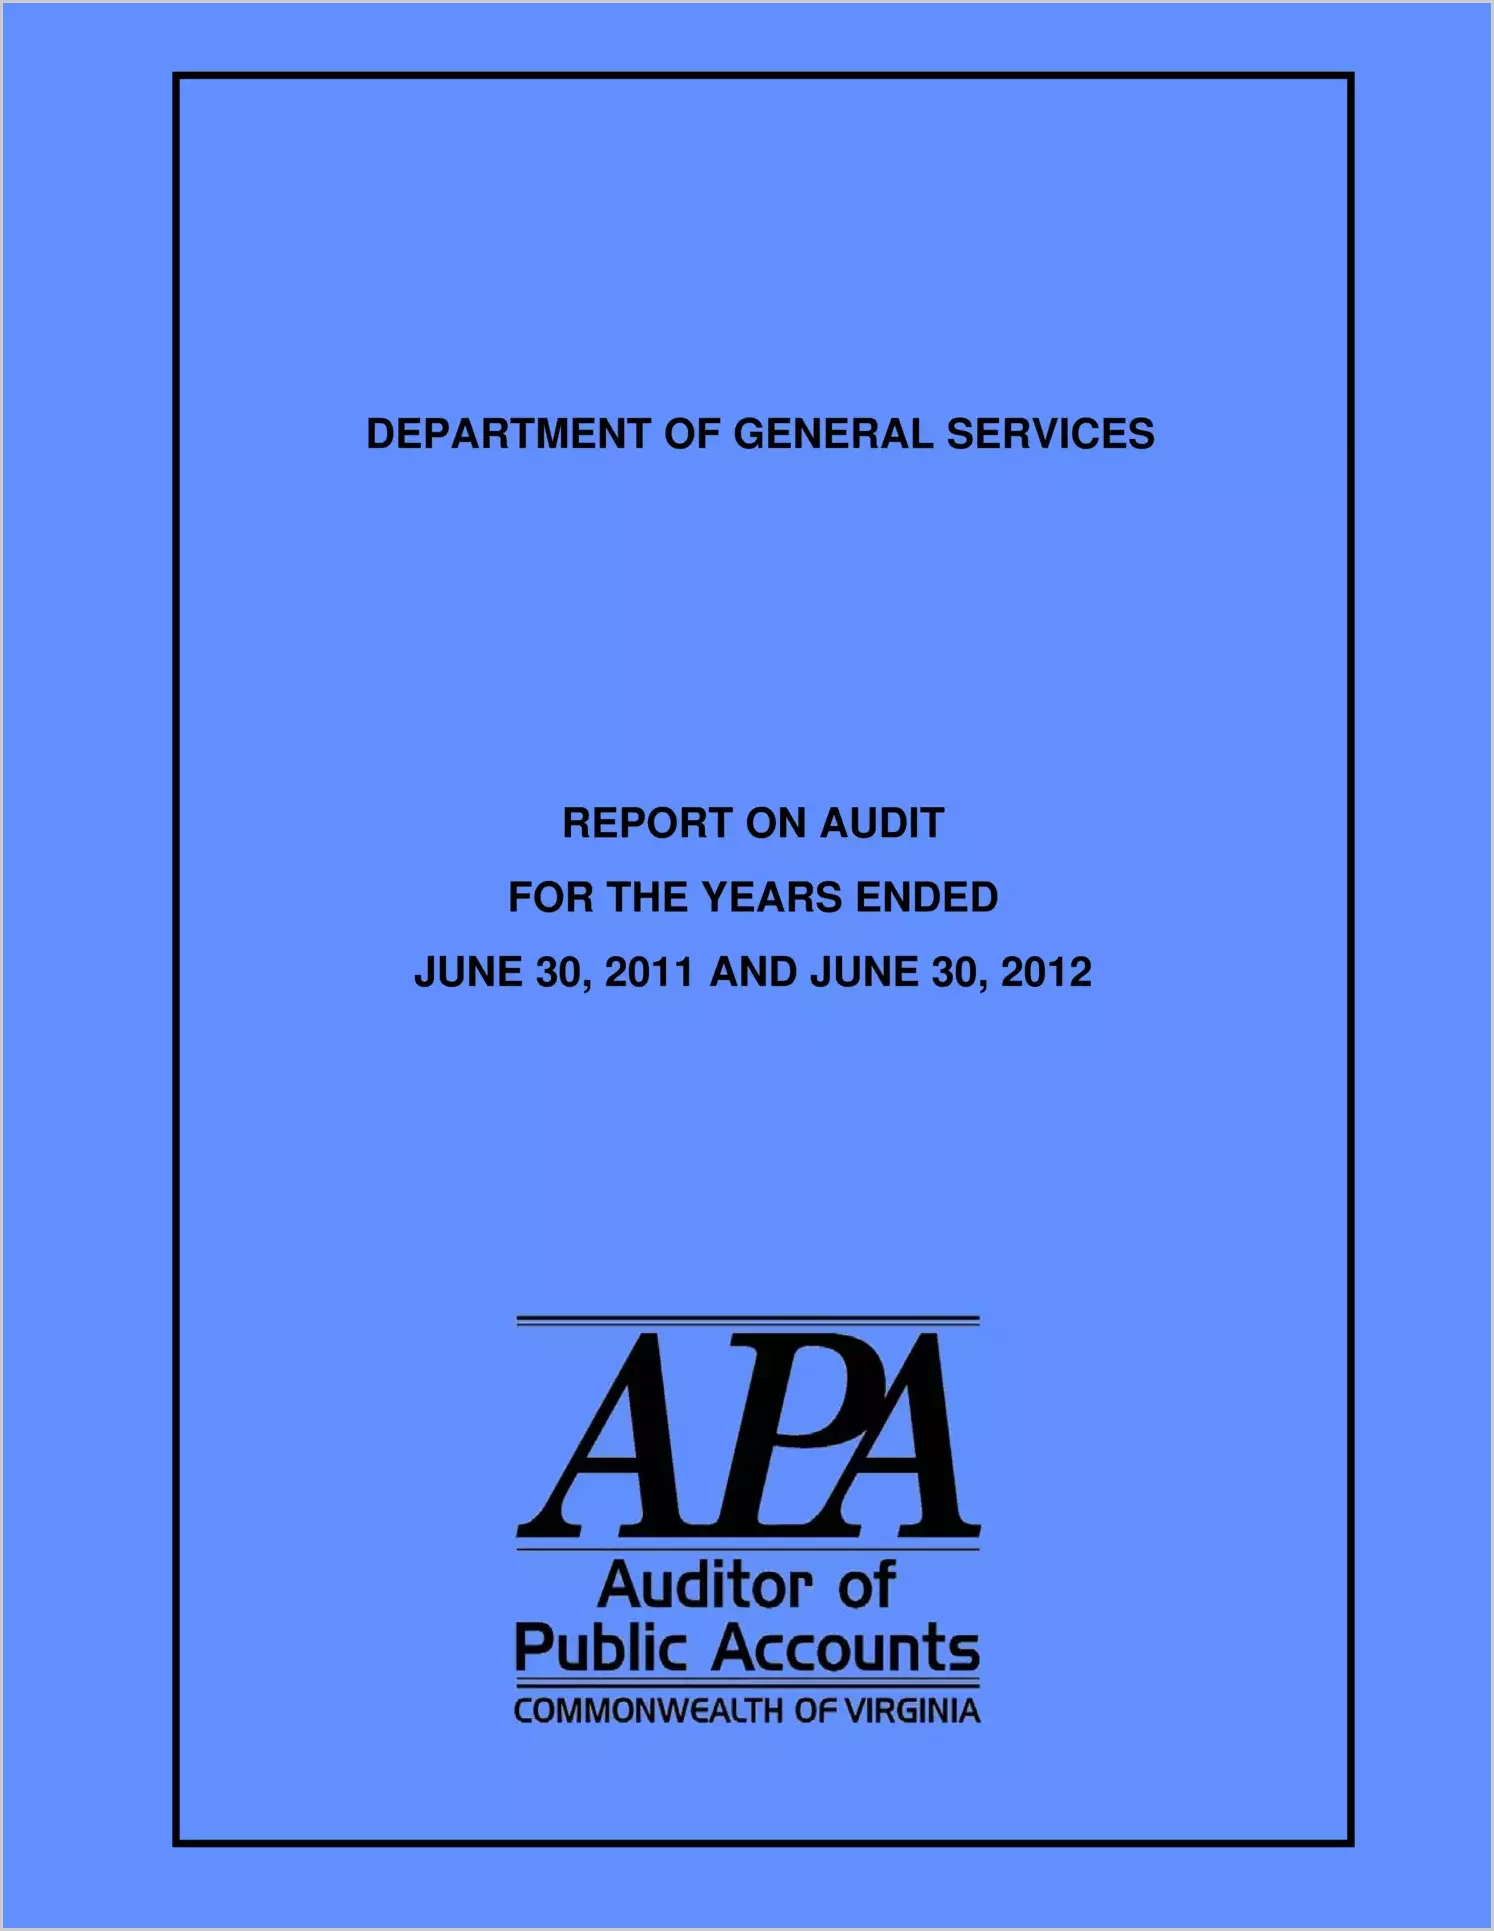 Department of General Services for the fiscal years ended June 30, 2011 and June 30, 2012